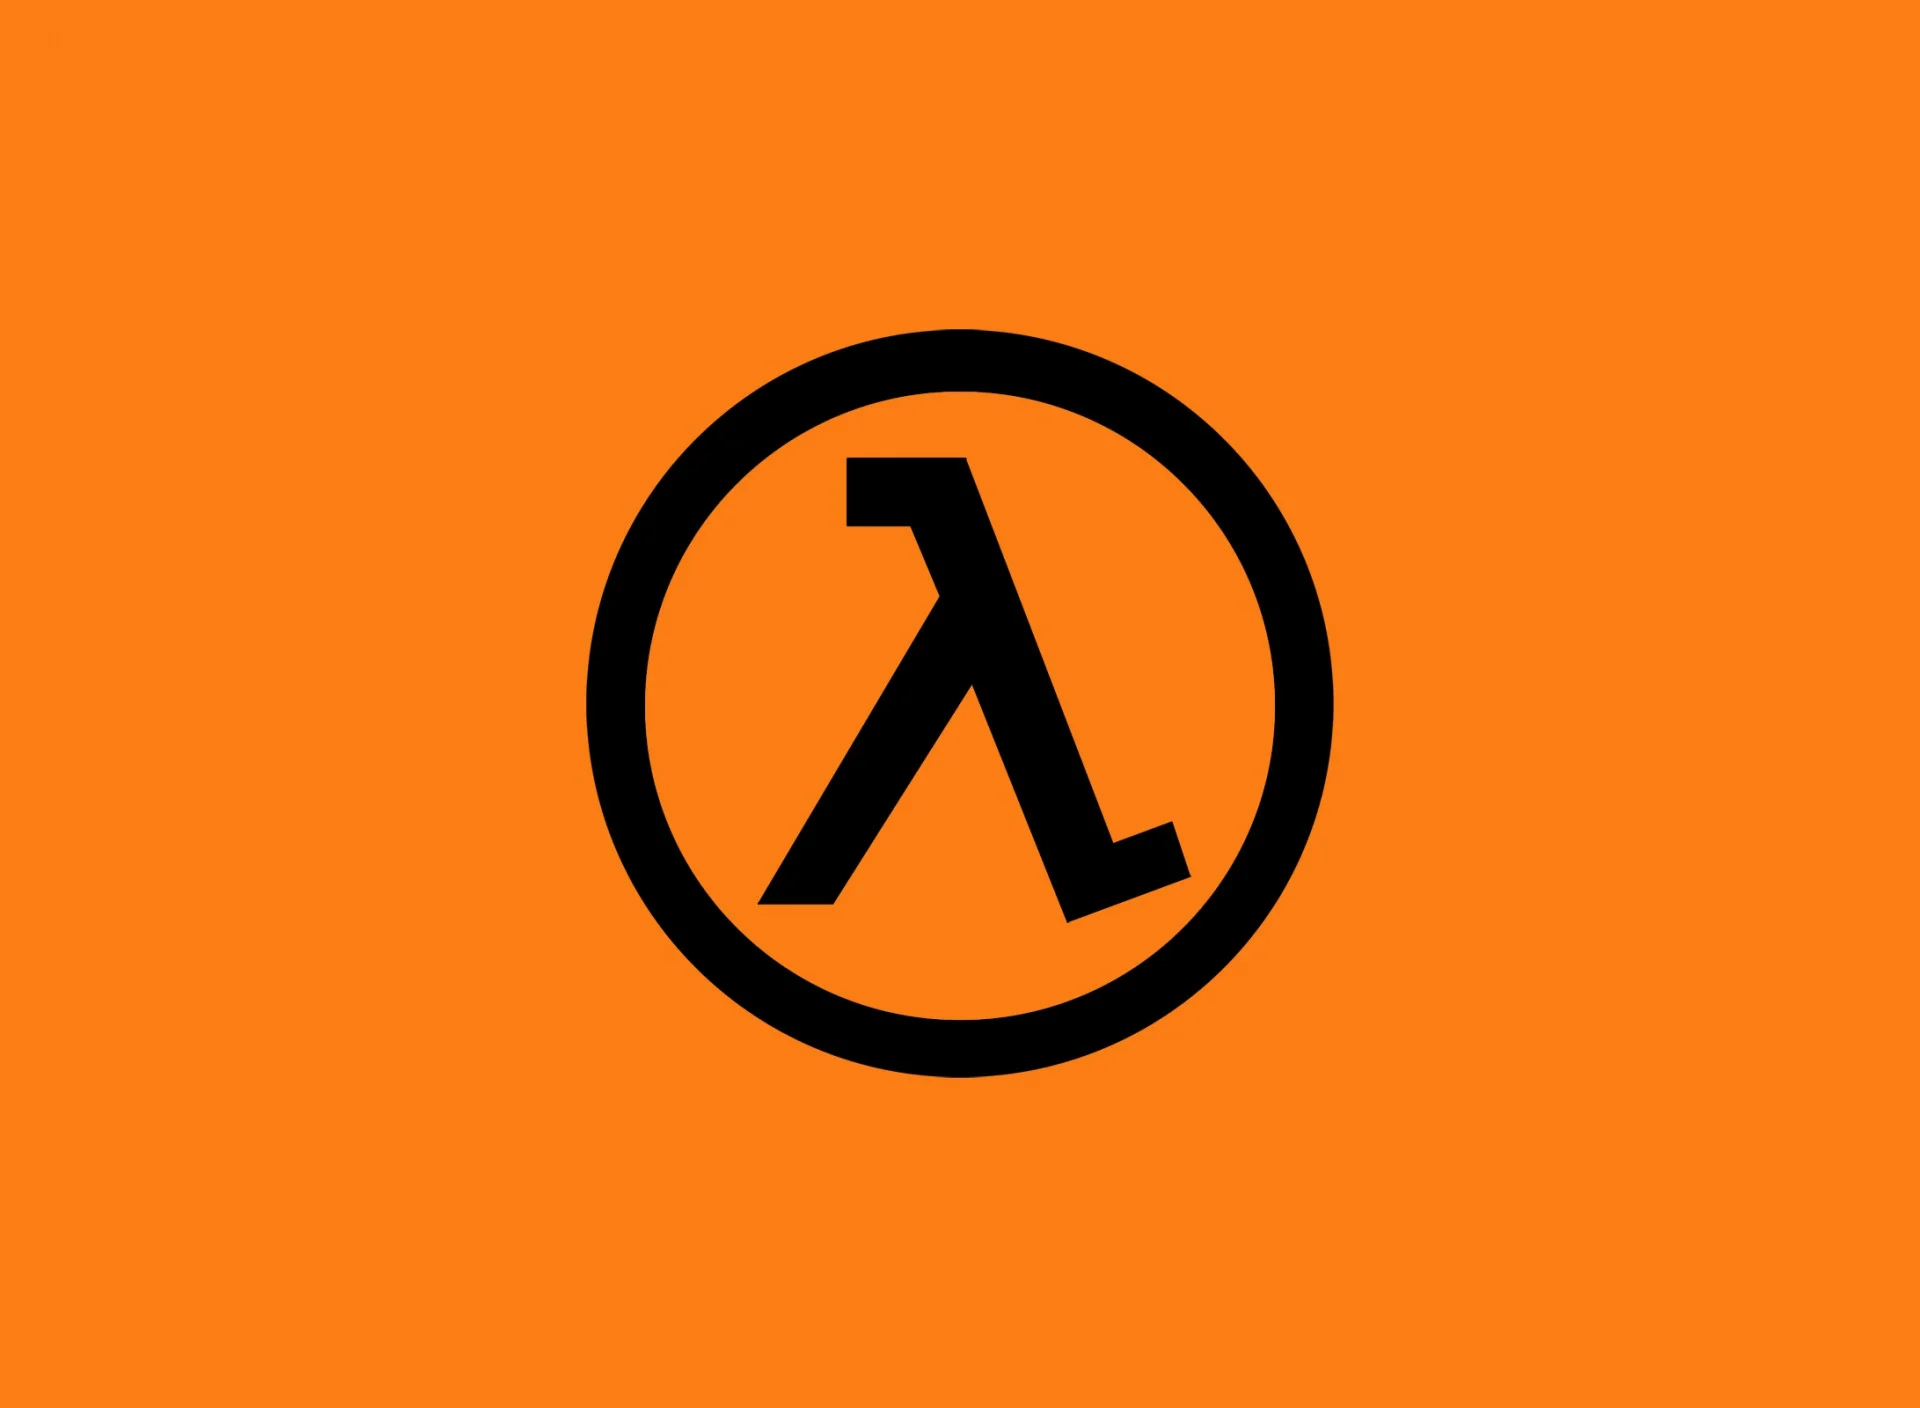 The new Half-Life will be announced in August. It will likely happen at the Gamescom 2023 event